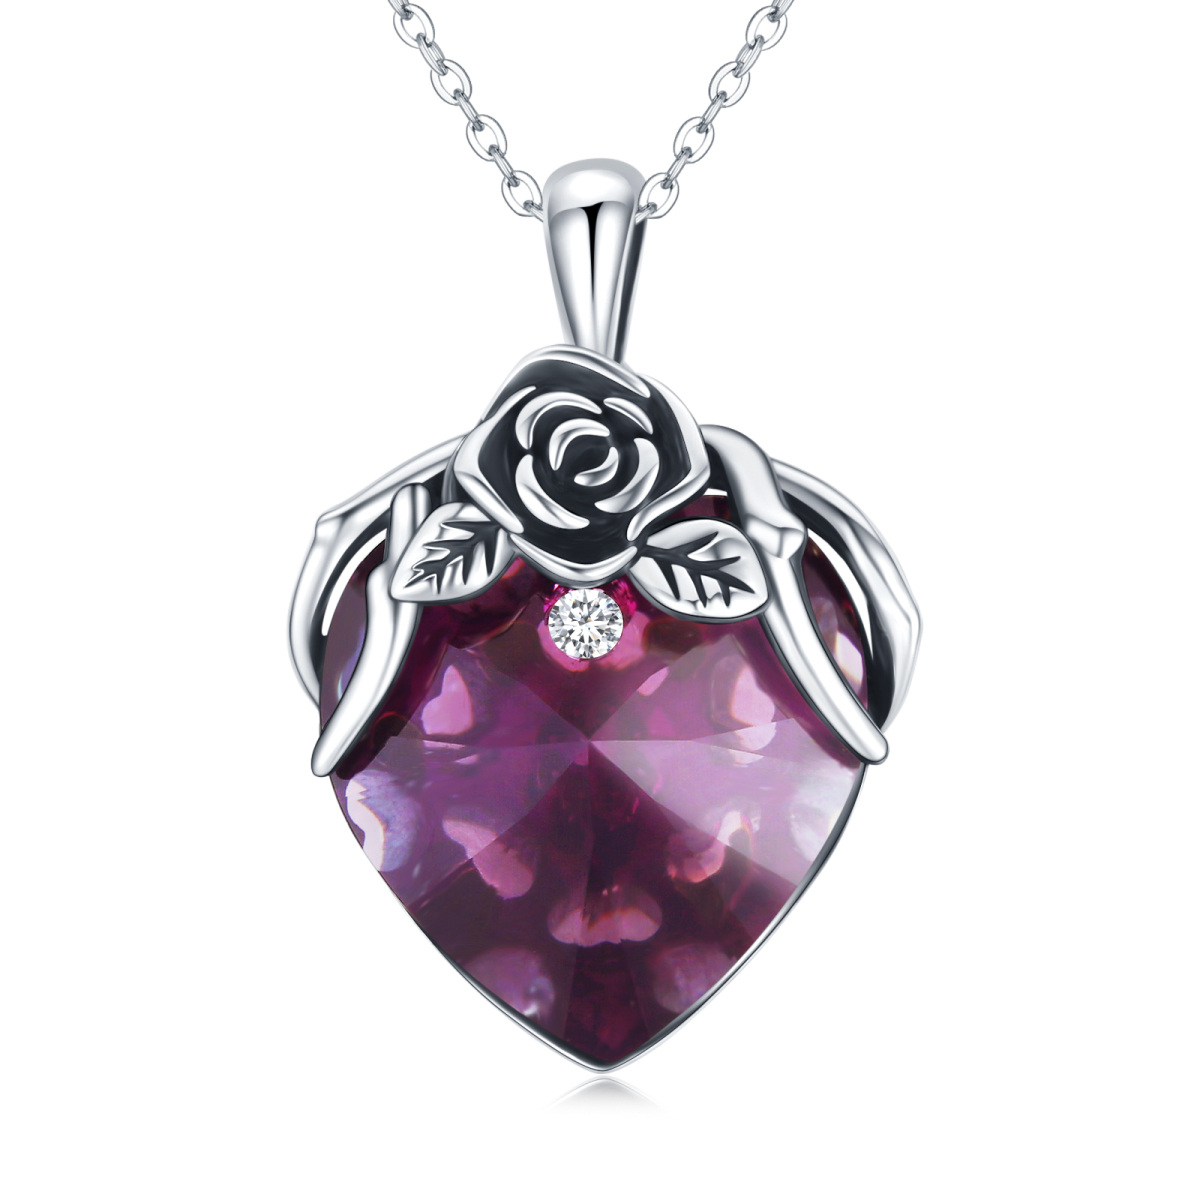 Sterling Silver Heart Shaped Rose & Heart Crystal Pendant Necklace-1